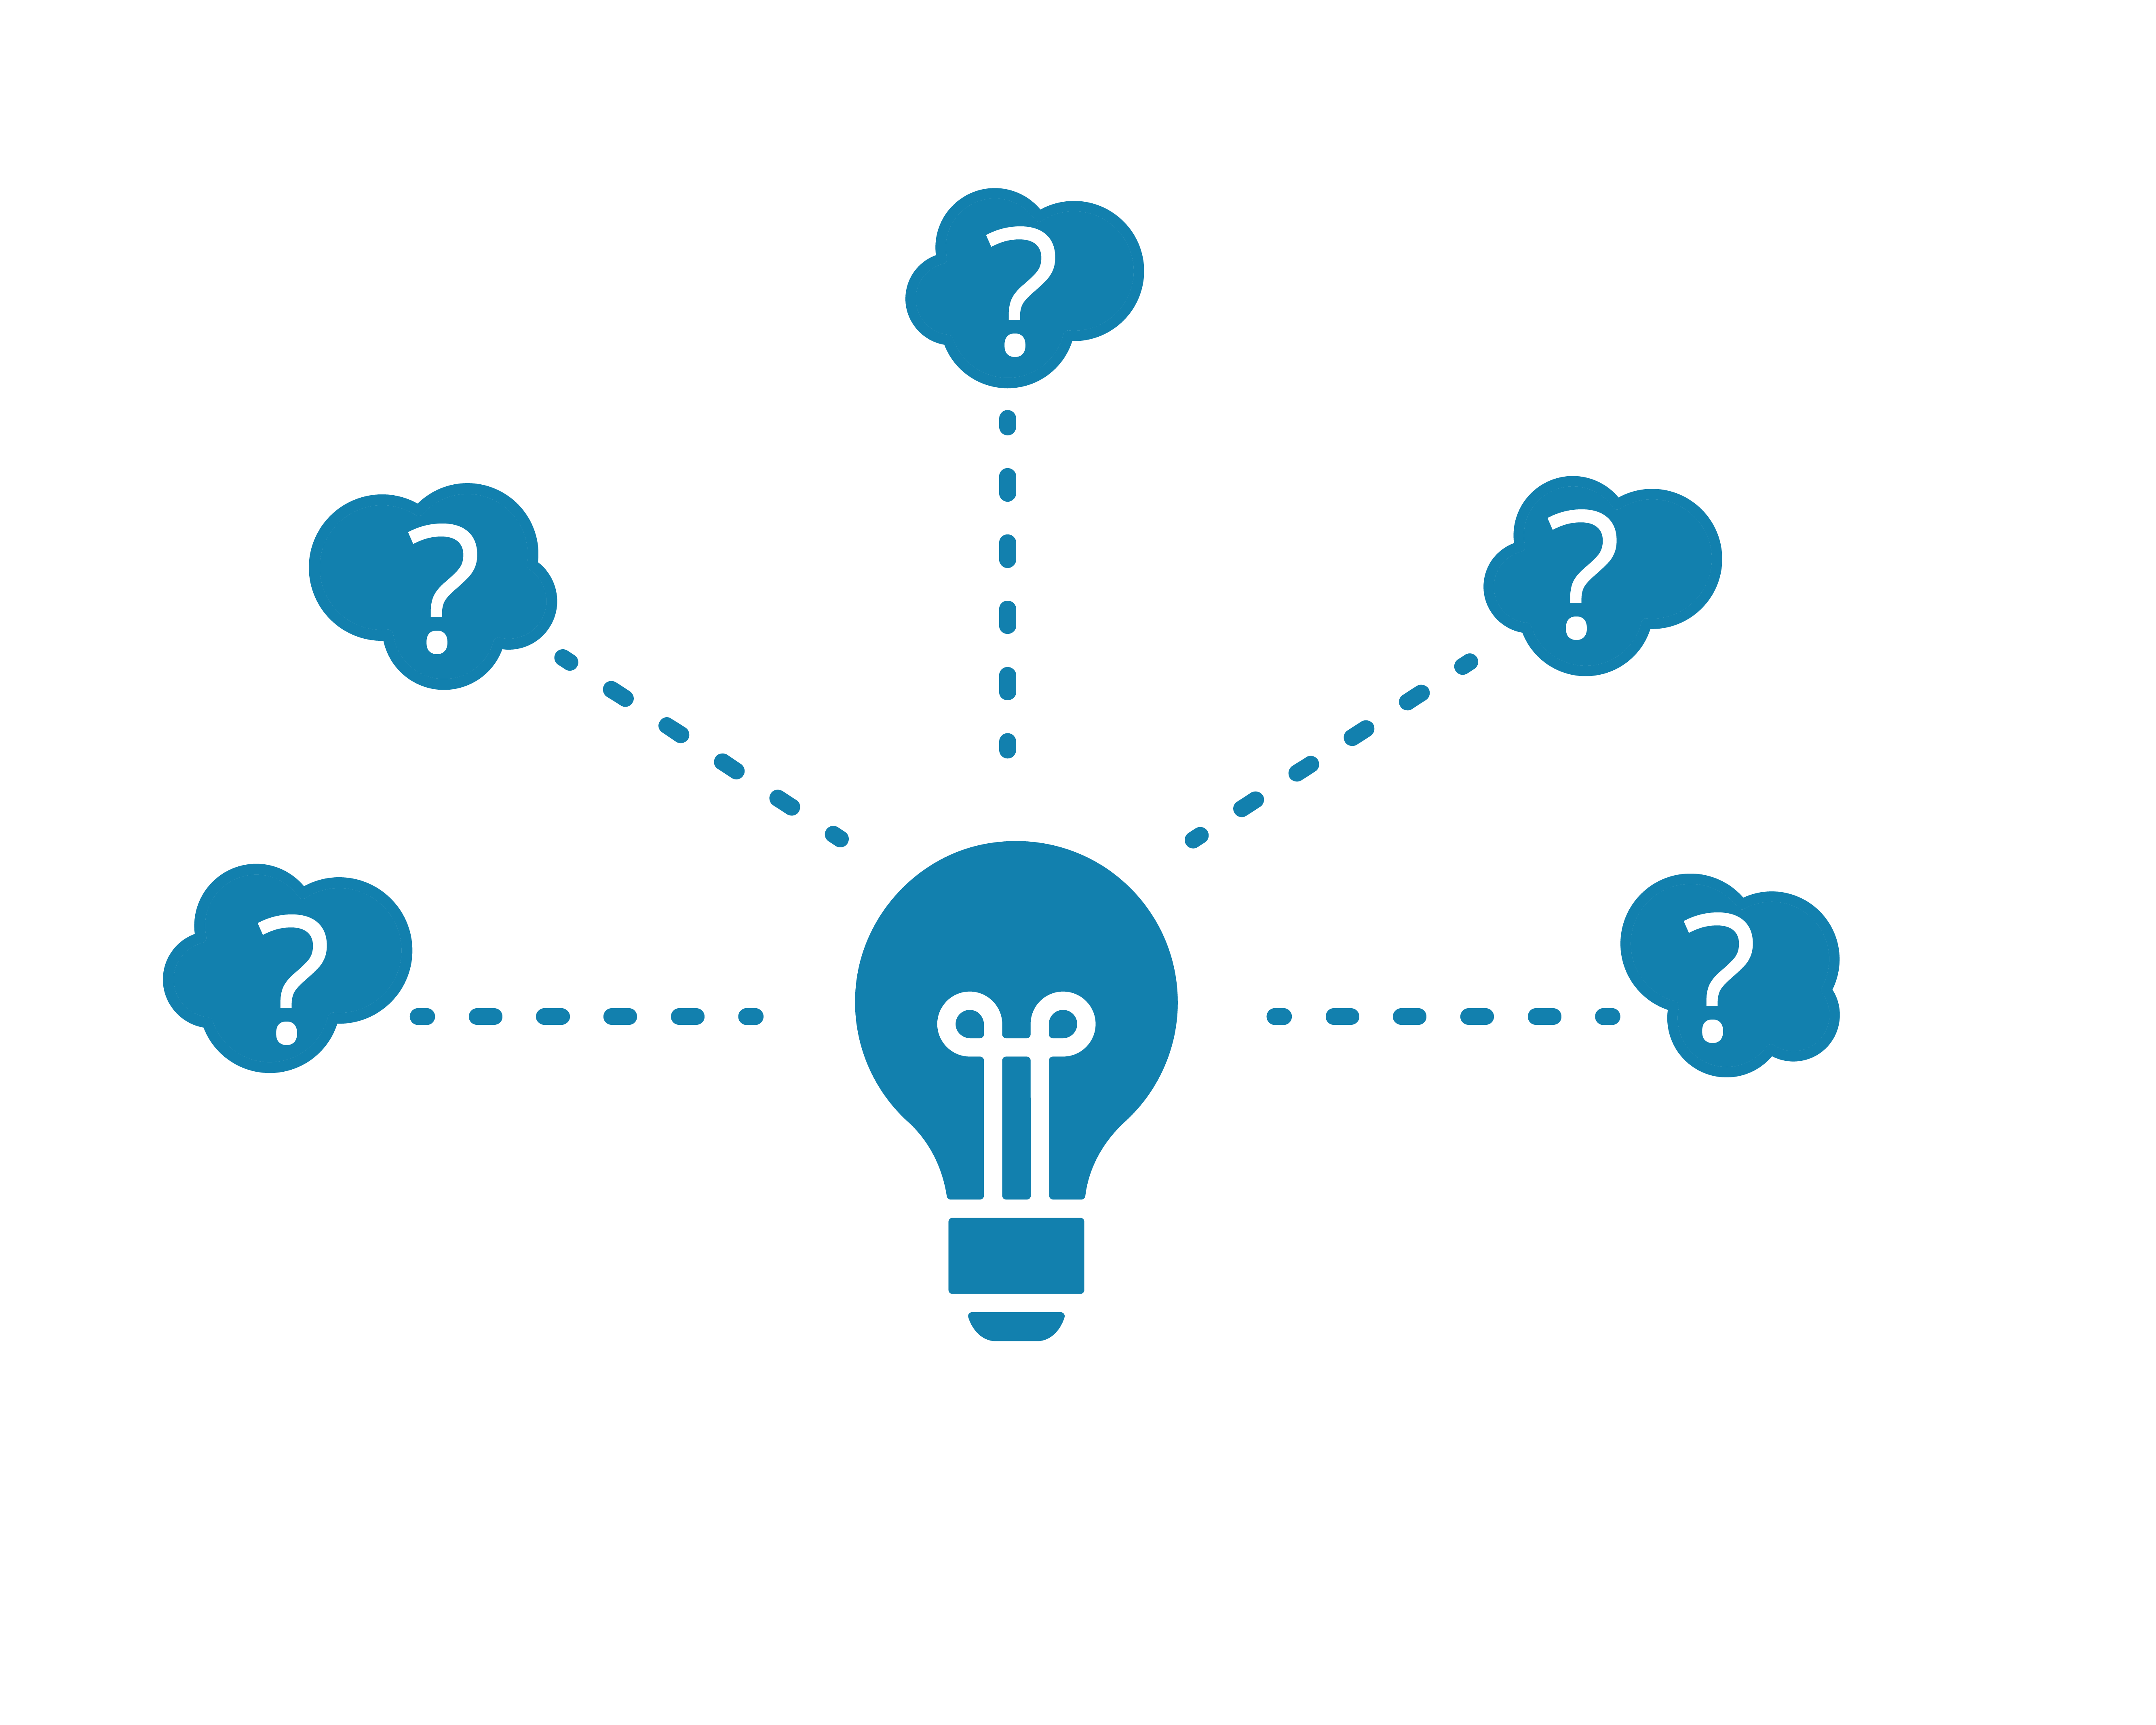 Blue graphic of lightbulb, with 5 thinking clouds linking back to the lightbulb with a dashed line.